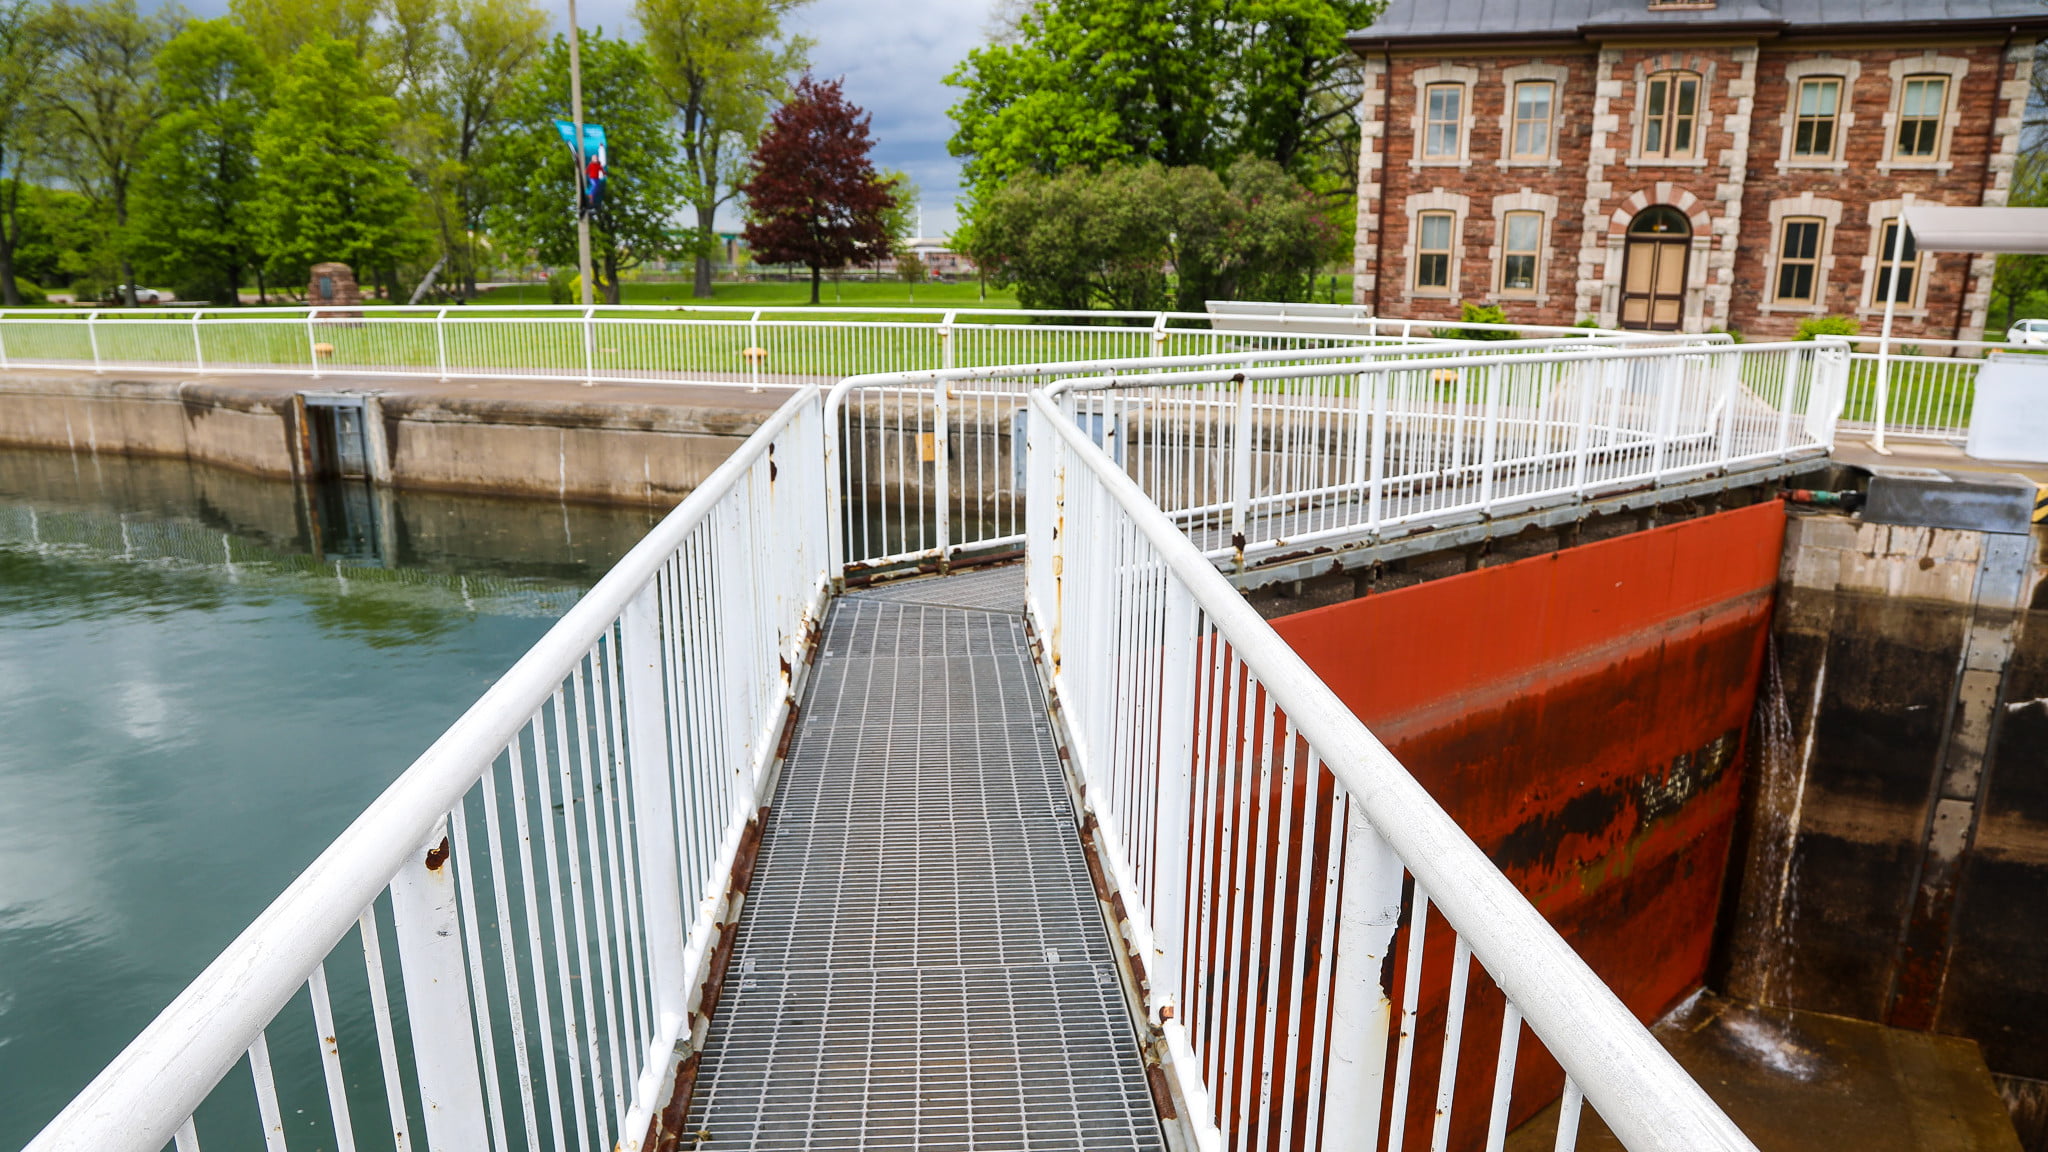  Sault Ste. Marie Canal National Historic Site